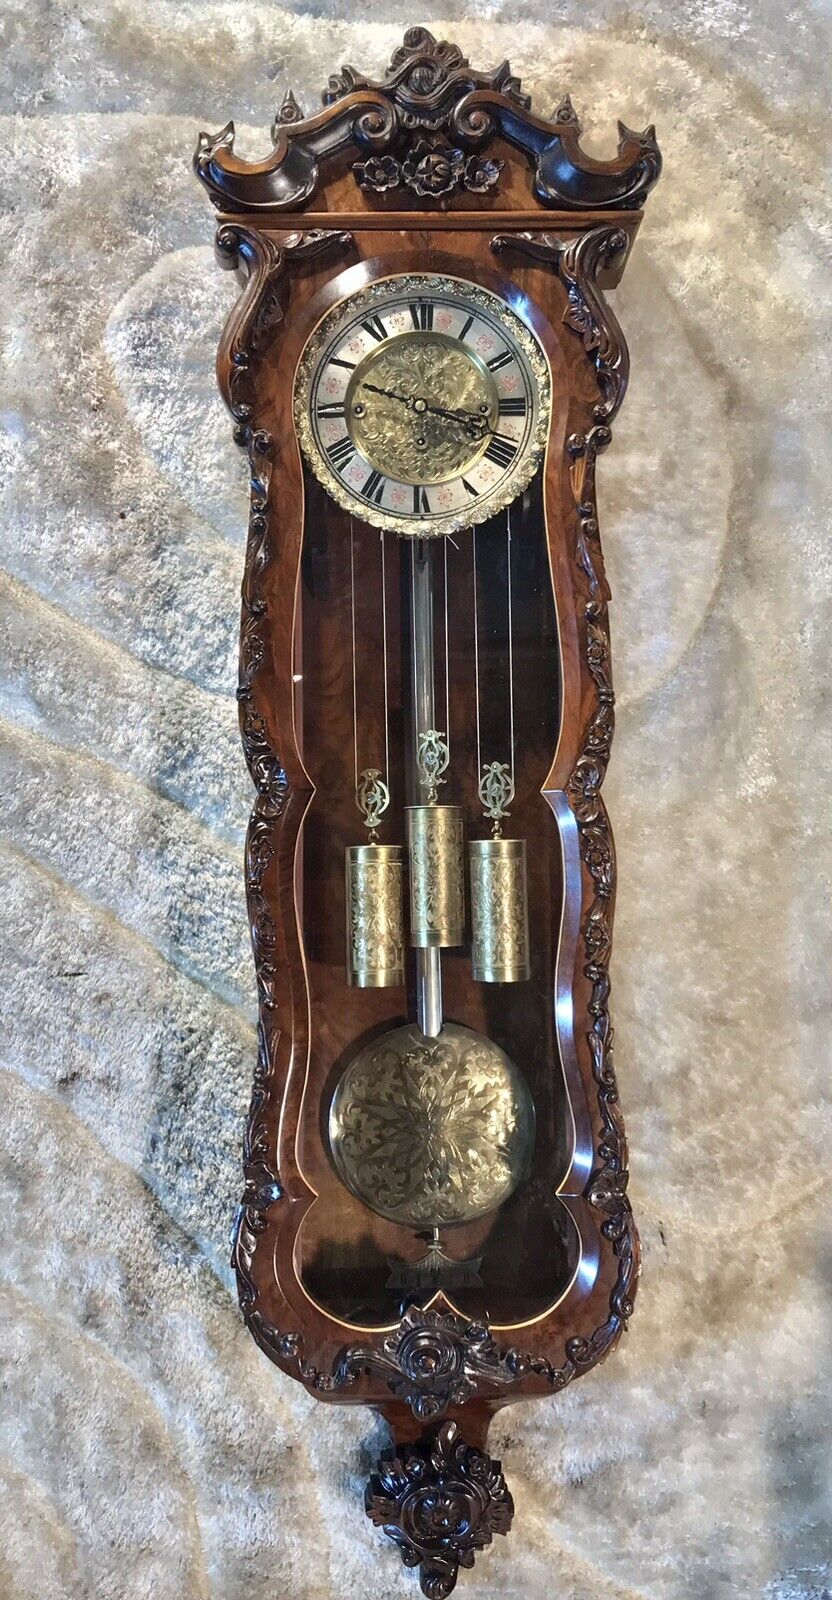 RARE Amazing Germany Movment Striking Vienna Clock,3 Carved Brass Weights Driven